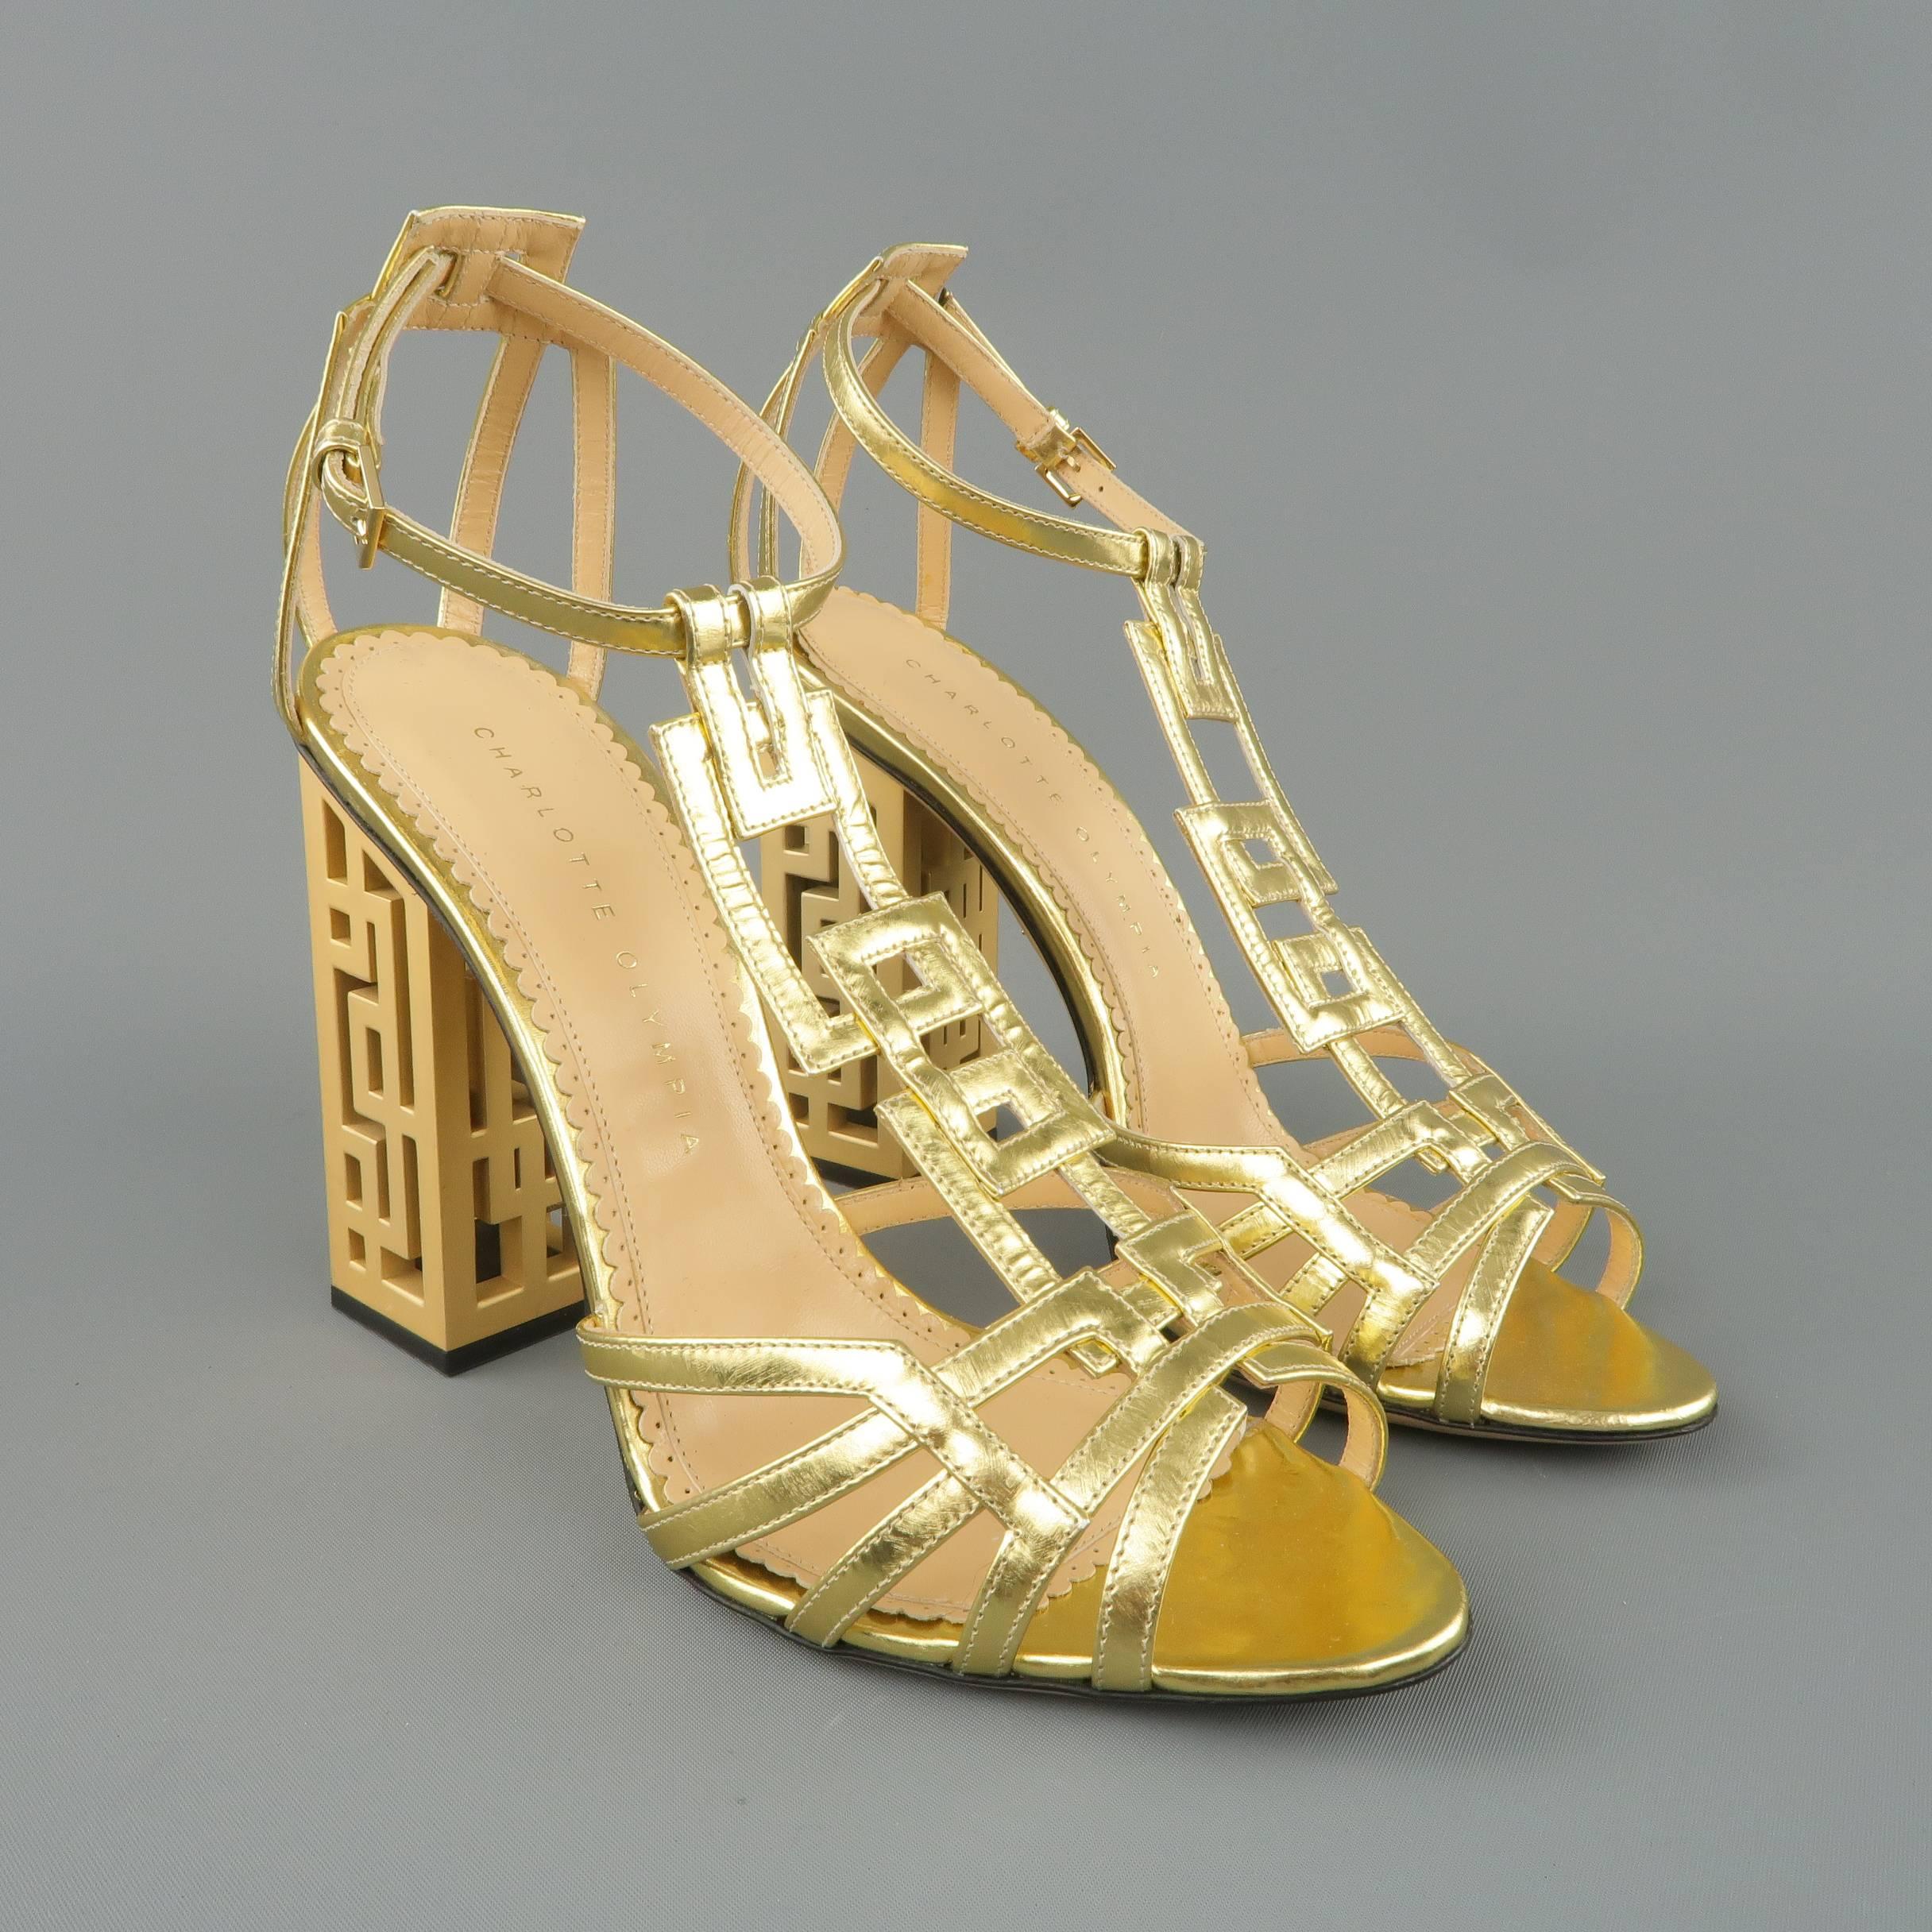 CHARLOTTE OLYMPIA sandals come in metallic gold leather and features a a thick cutout T strap and thick metal geometric cutout block heel. Made in Italy.
 
New without Tags.
Marked: IT 38.5
 
Measurements:
 
Heel: 4.5 in.
